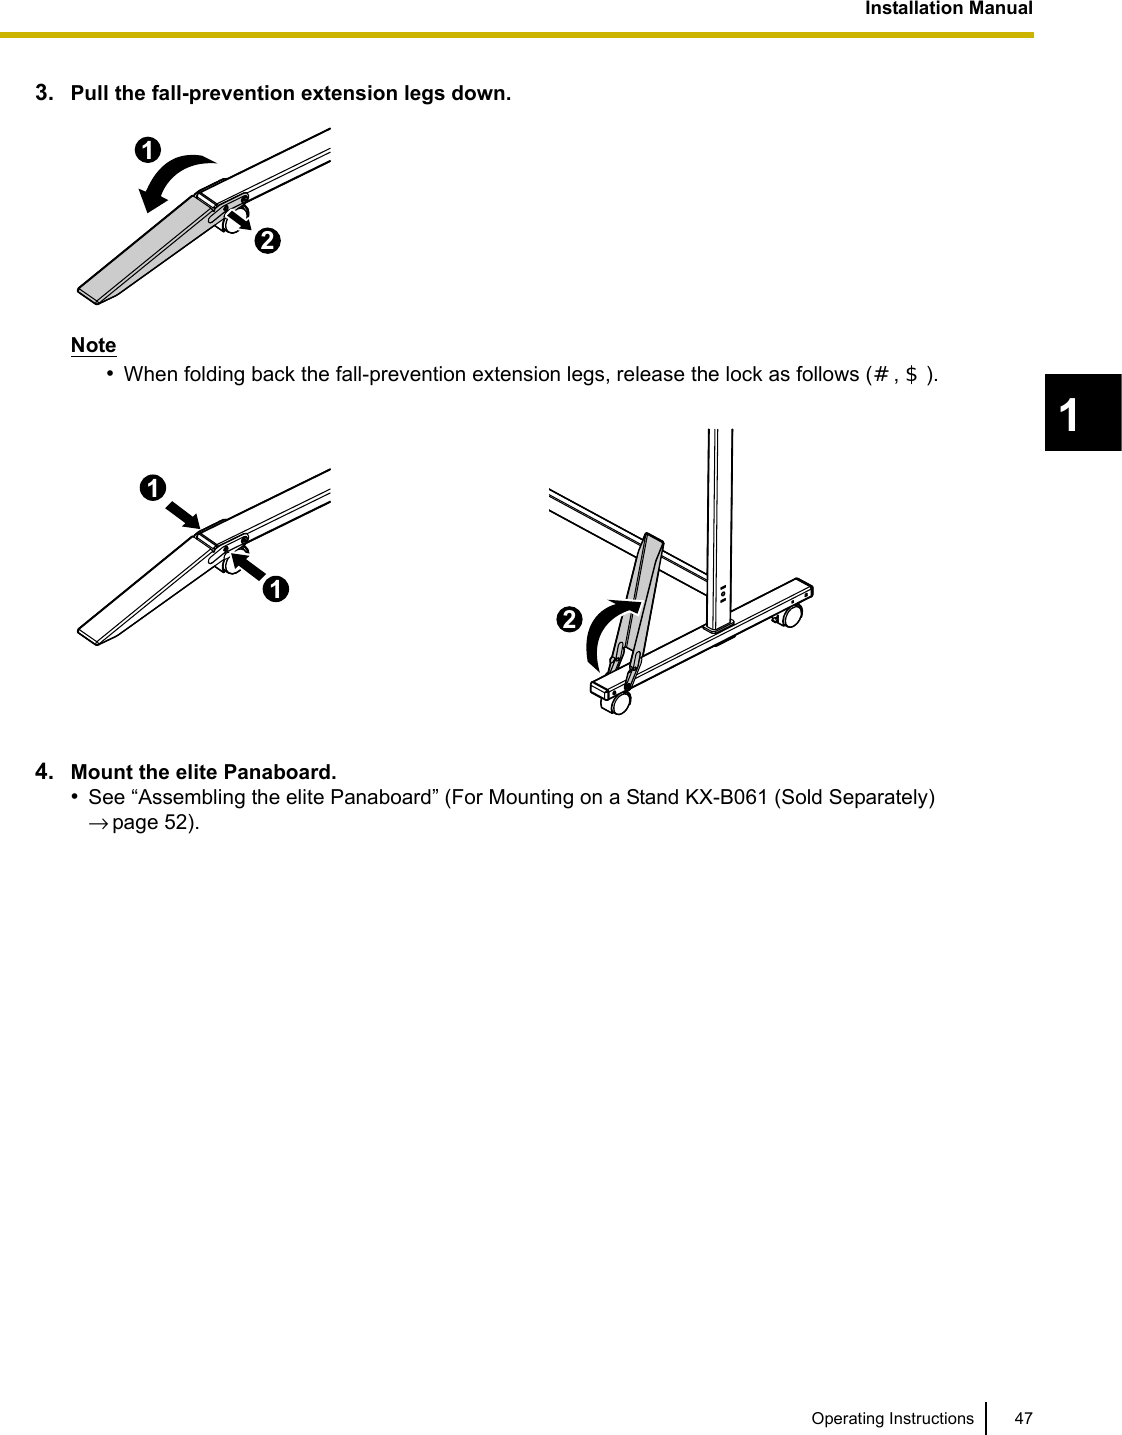 Installation Manual47Operating Instructions13. Pull the fall-prevention extension legs down.Note•When folding back the fall-prevention extension legs, release the lock as follows (,).4. Mount the elite Panaboard.•See “Assembling the elite Panaboard” (For Mounting on a Stand KX-B061 (Sold Separately) →  page 52).21112